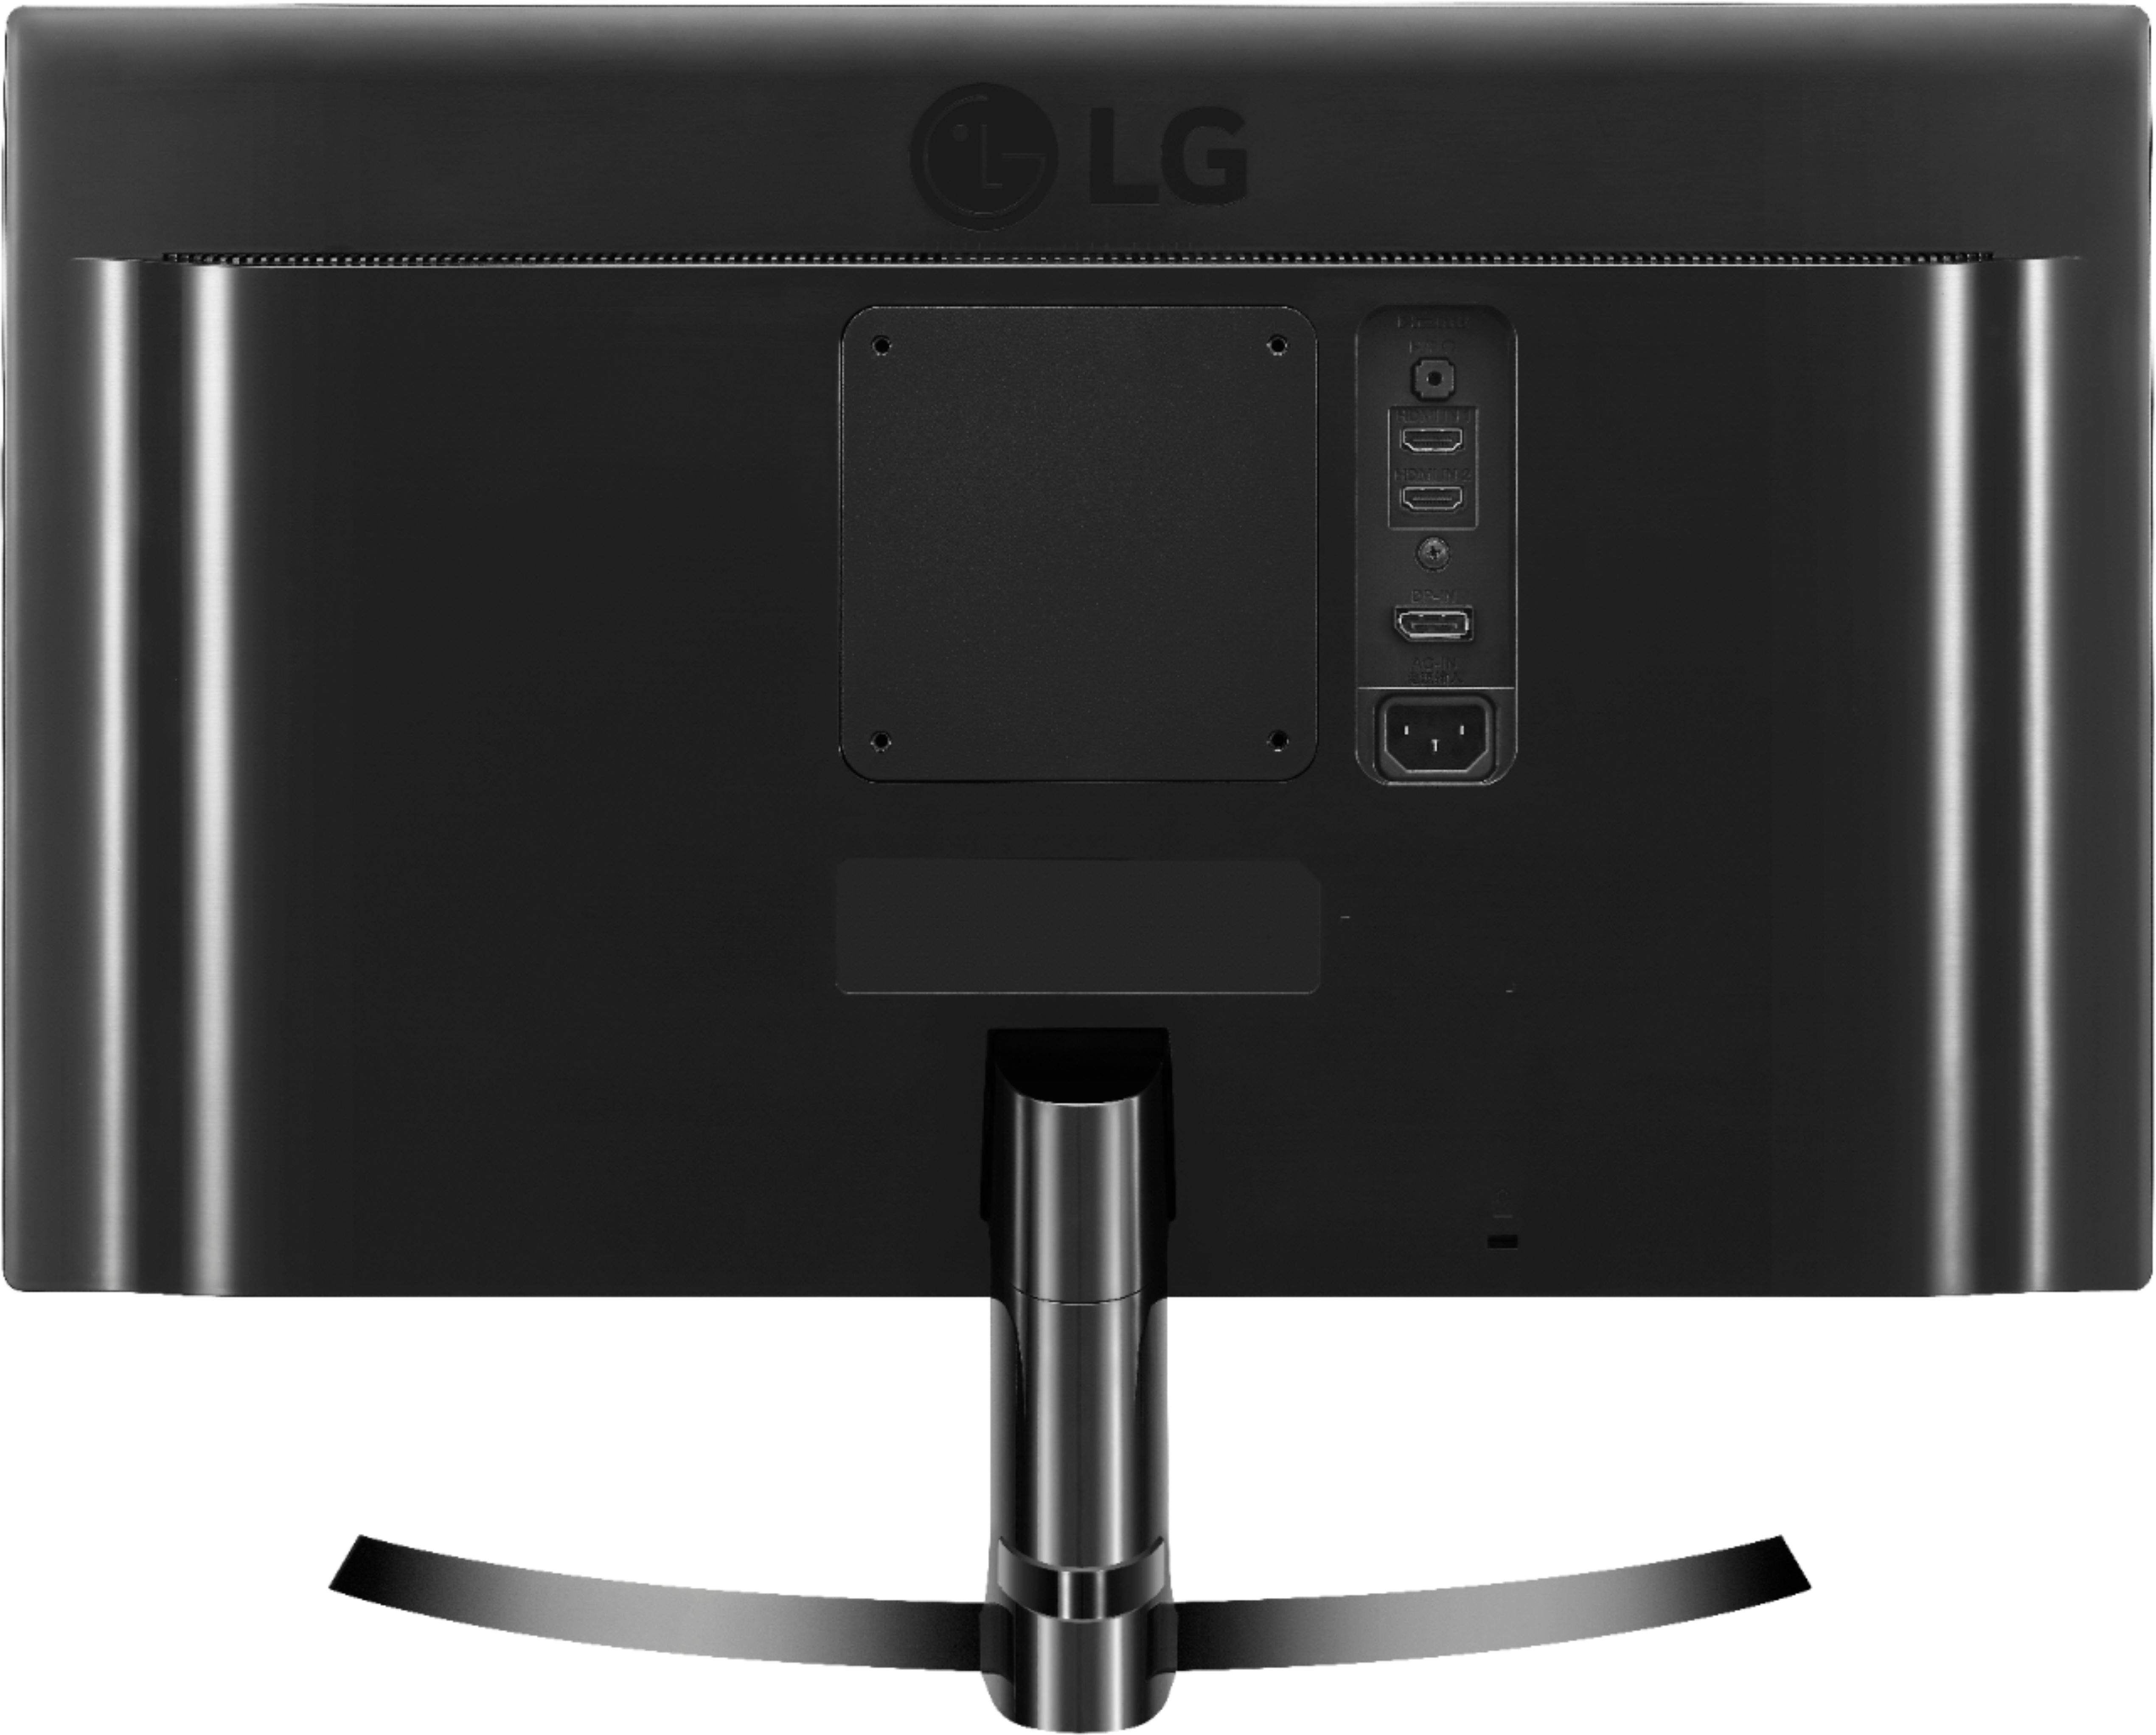 Back View: LG - 30" Built-In Gas Cooktop with Superboil Burner - Black stainless steel